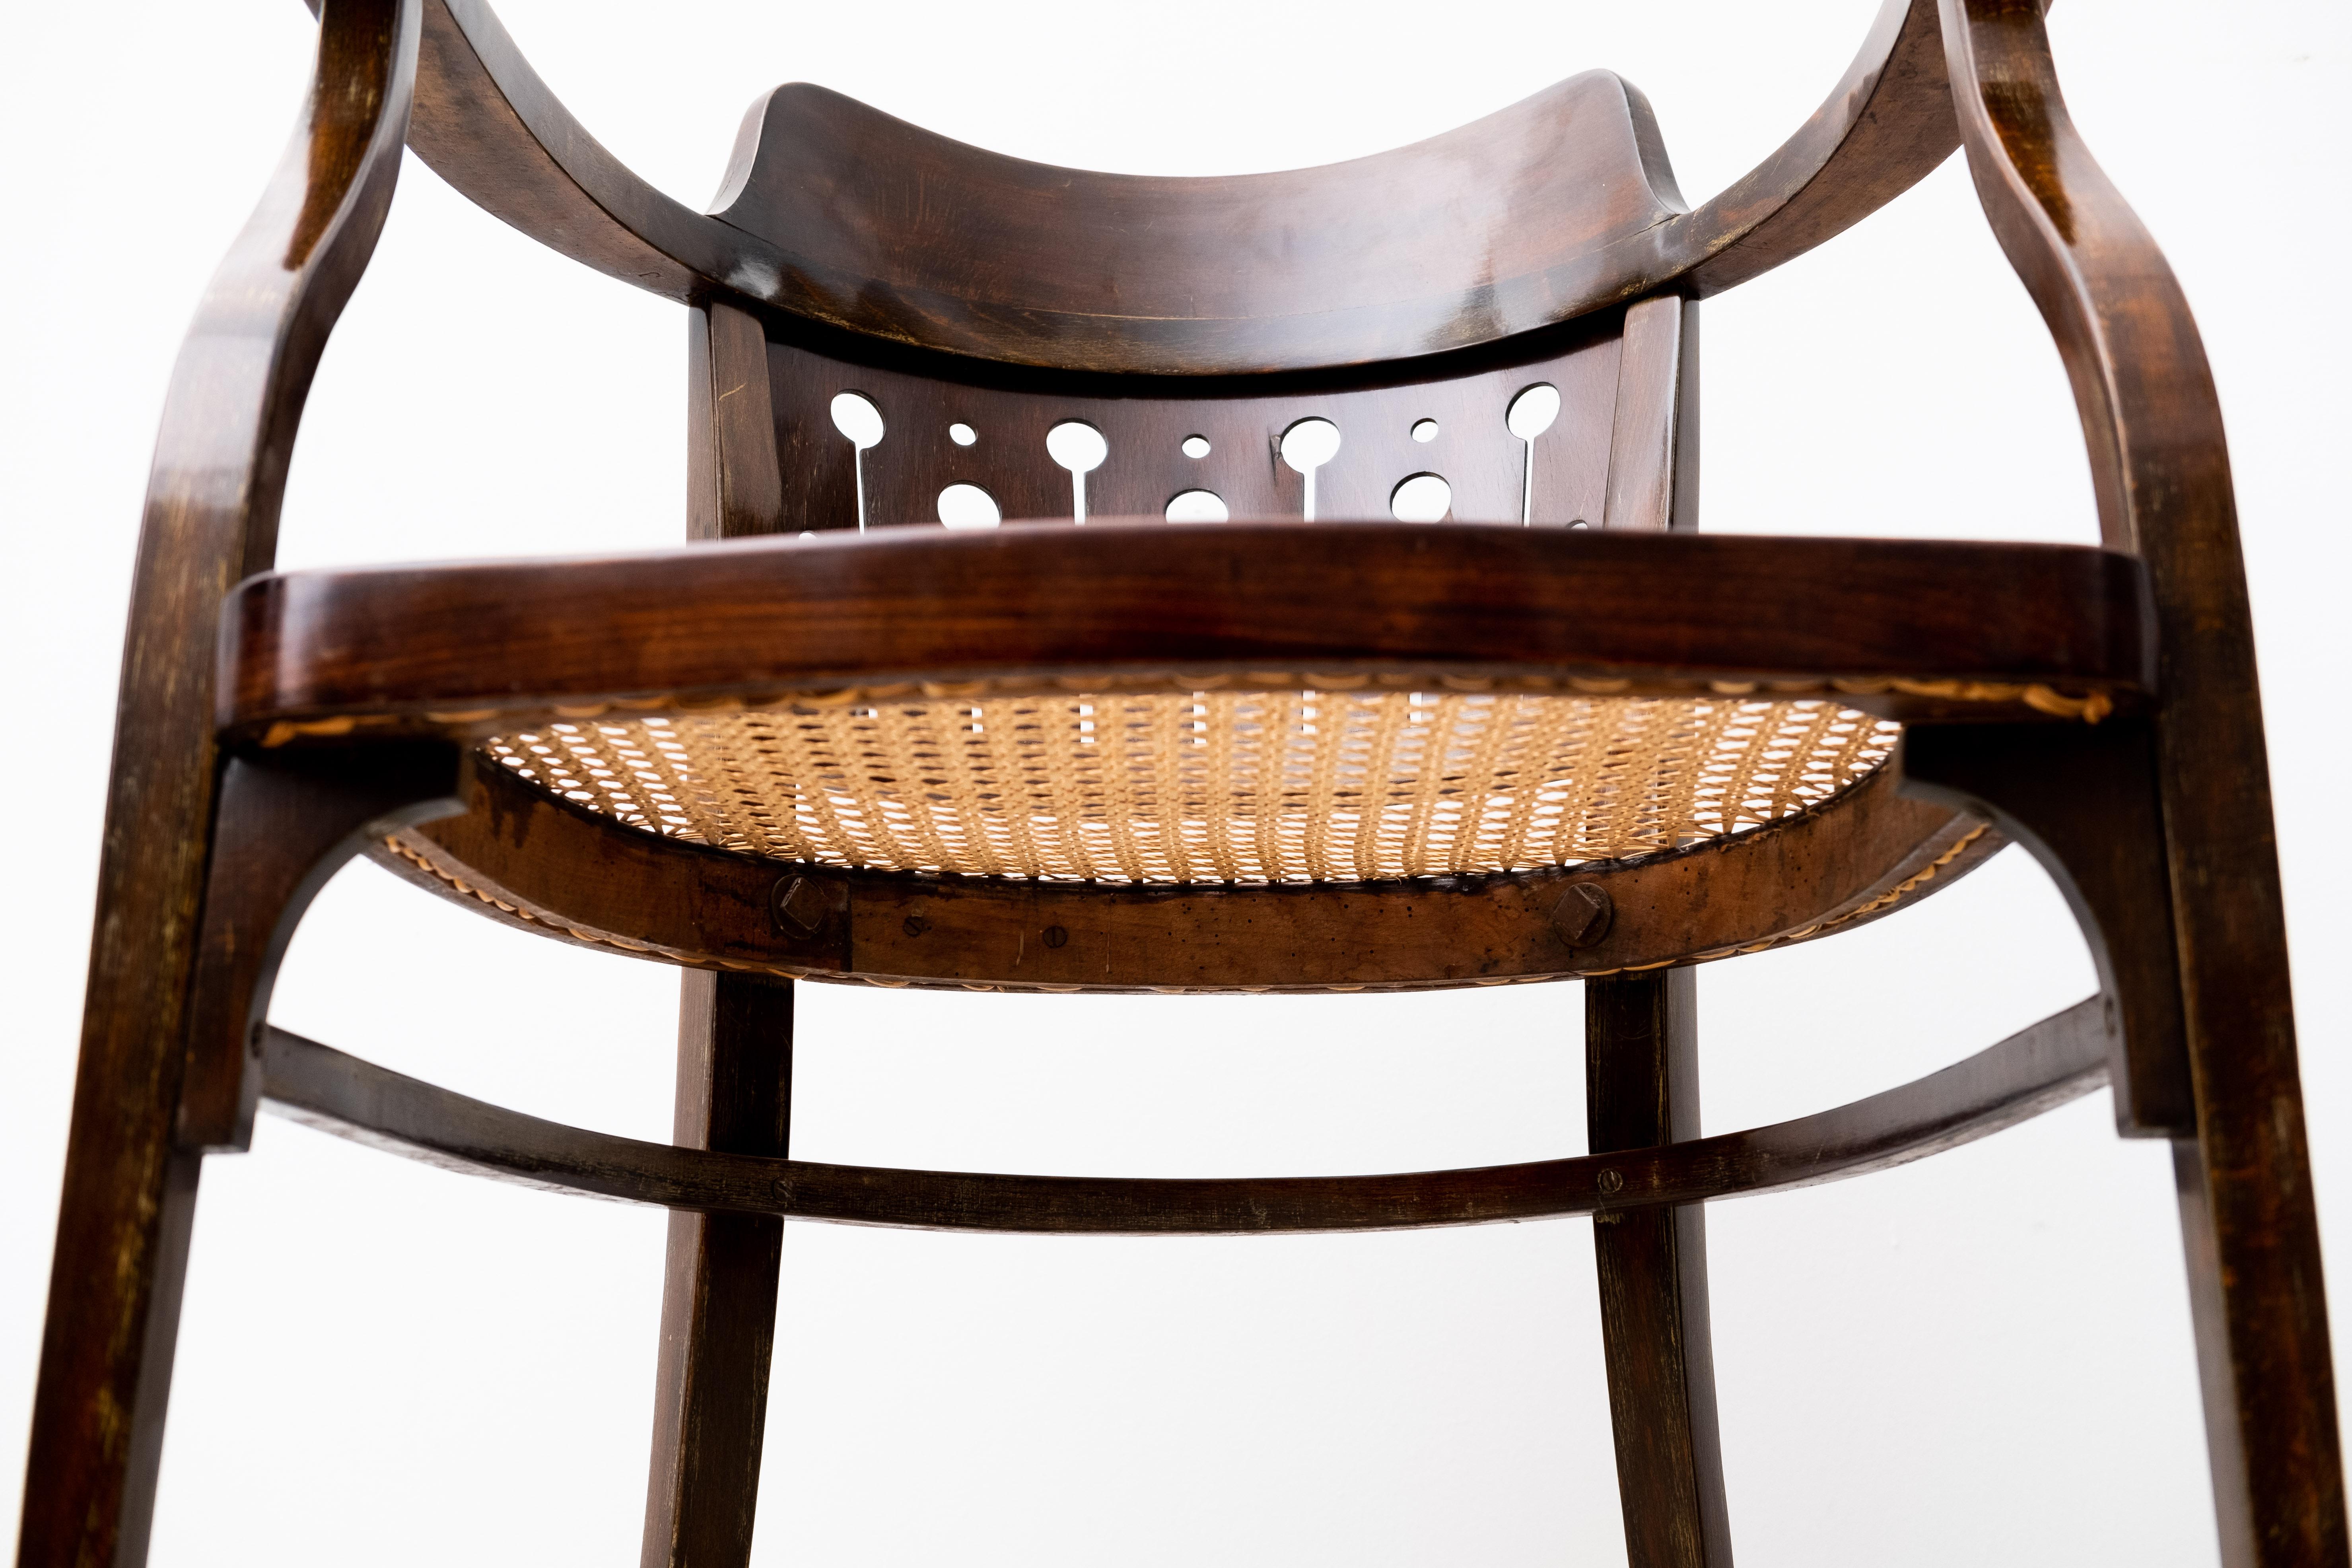 Secession Armchair by Otto Wagner/Gustav Siegel, Thonet Brothers (Vienna, 1905) For Sale 8